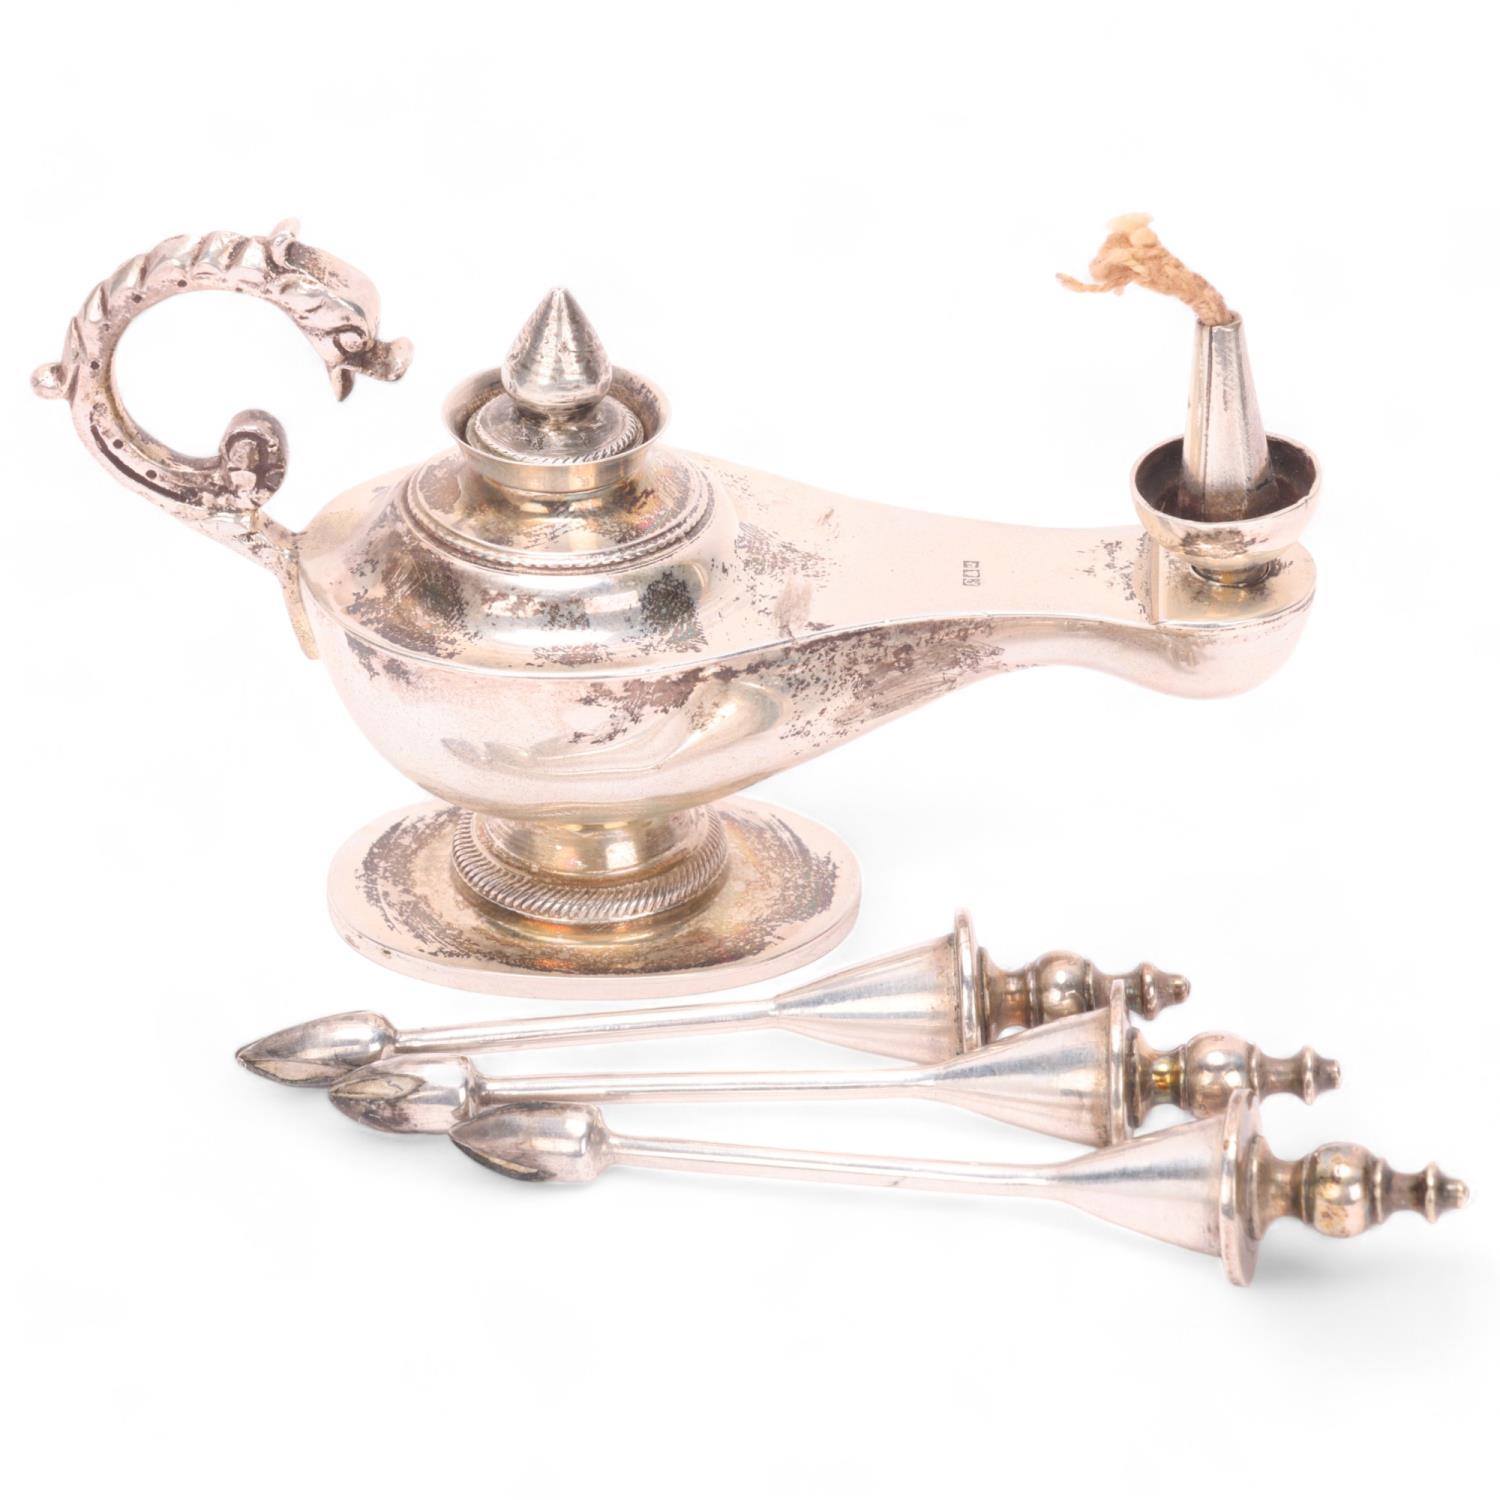 An Egyptian silver lamp/lighter in the form of a Roman lamp, together with 3 silver plated cigar/